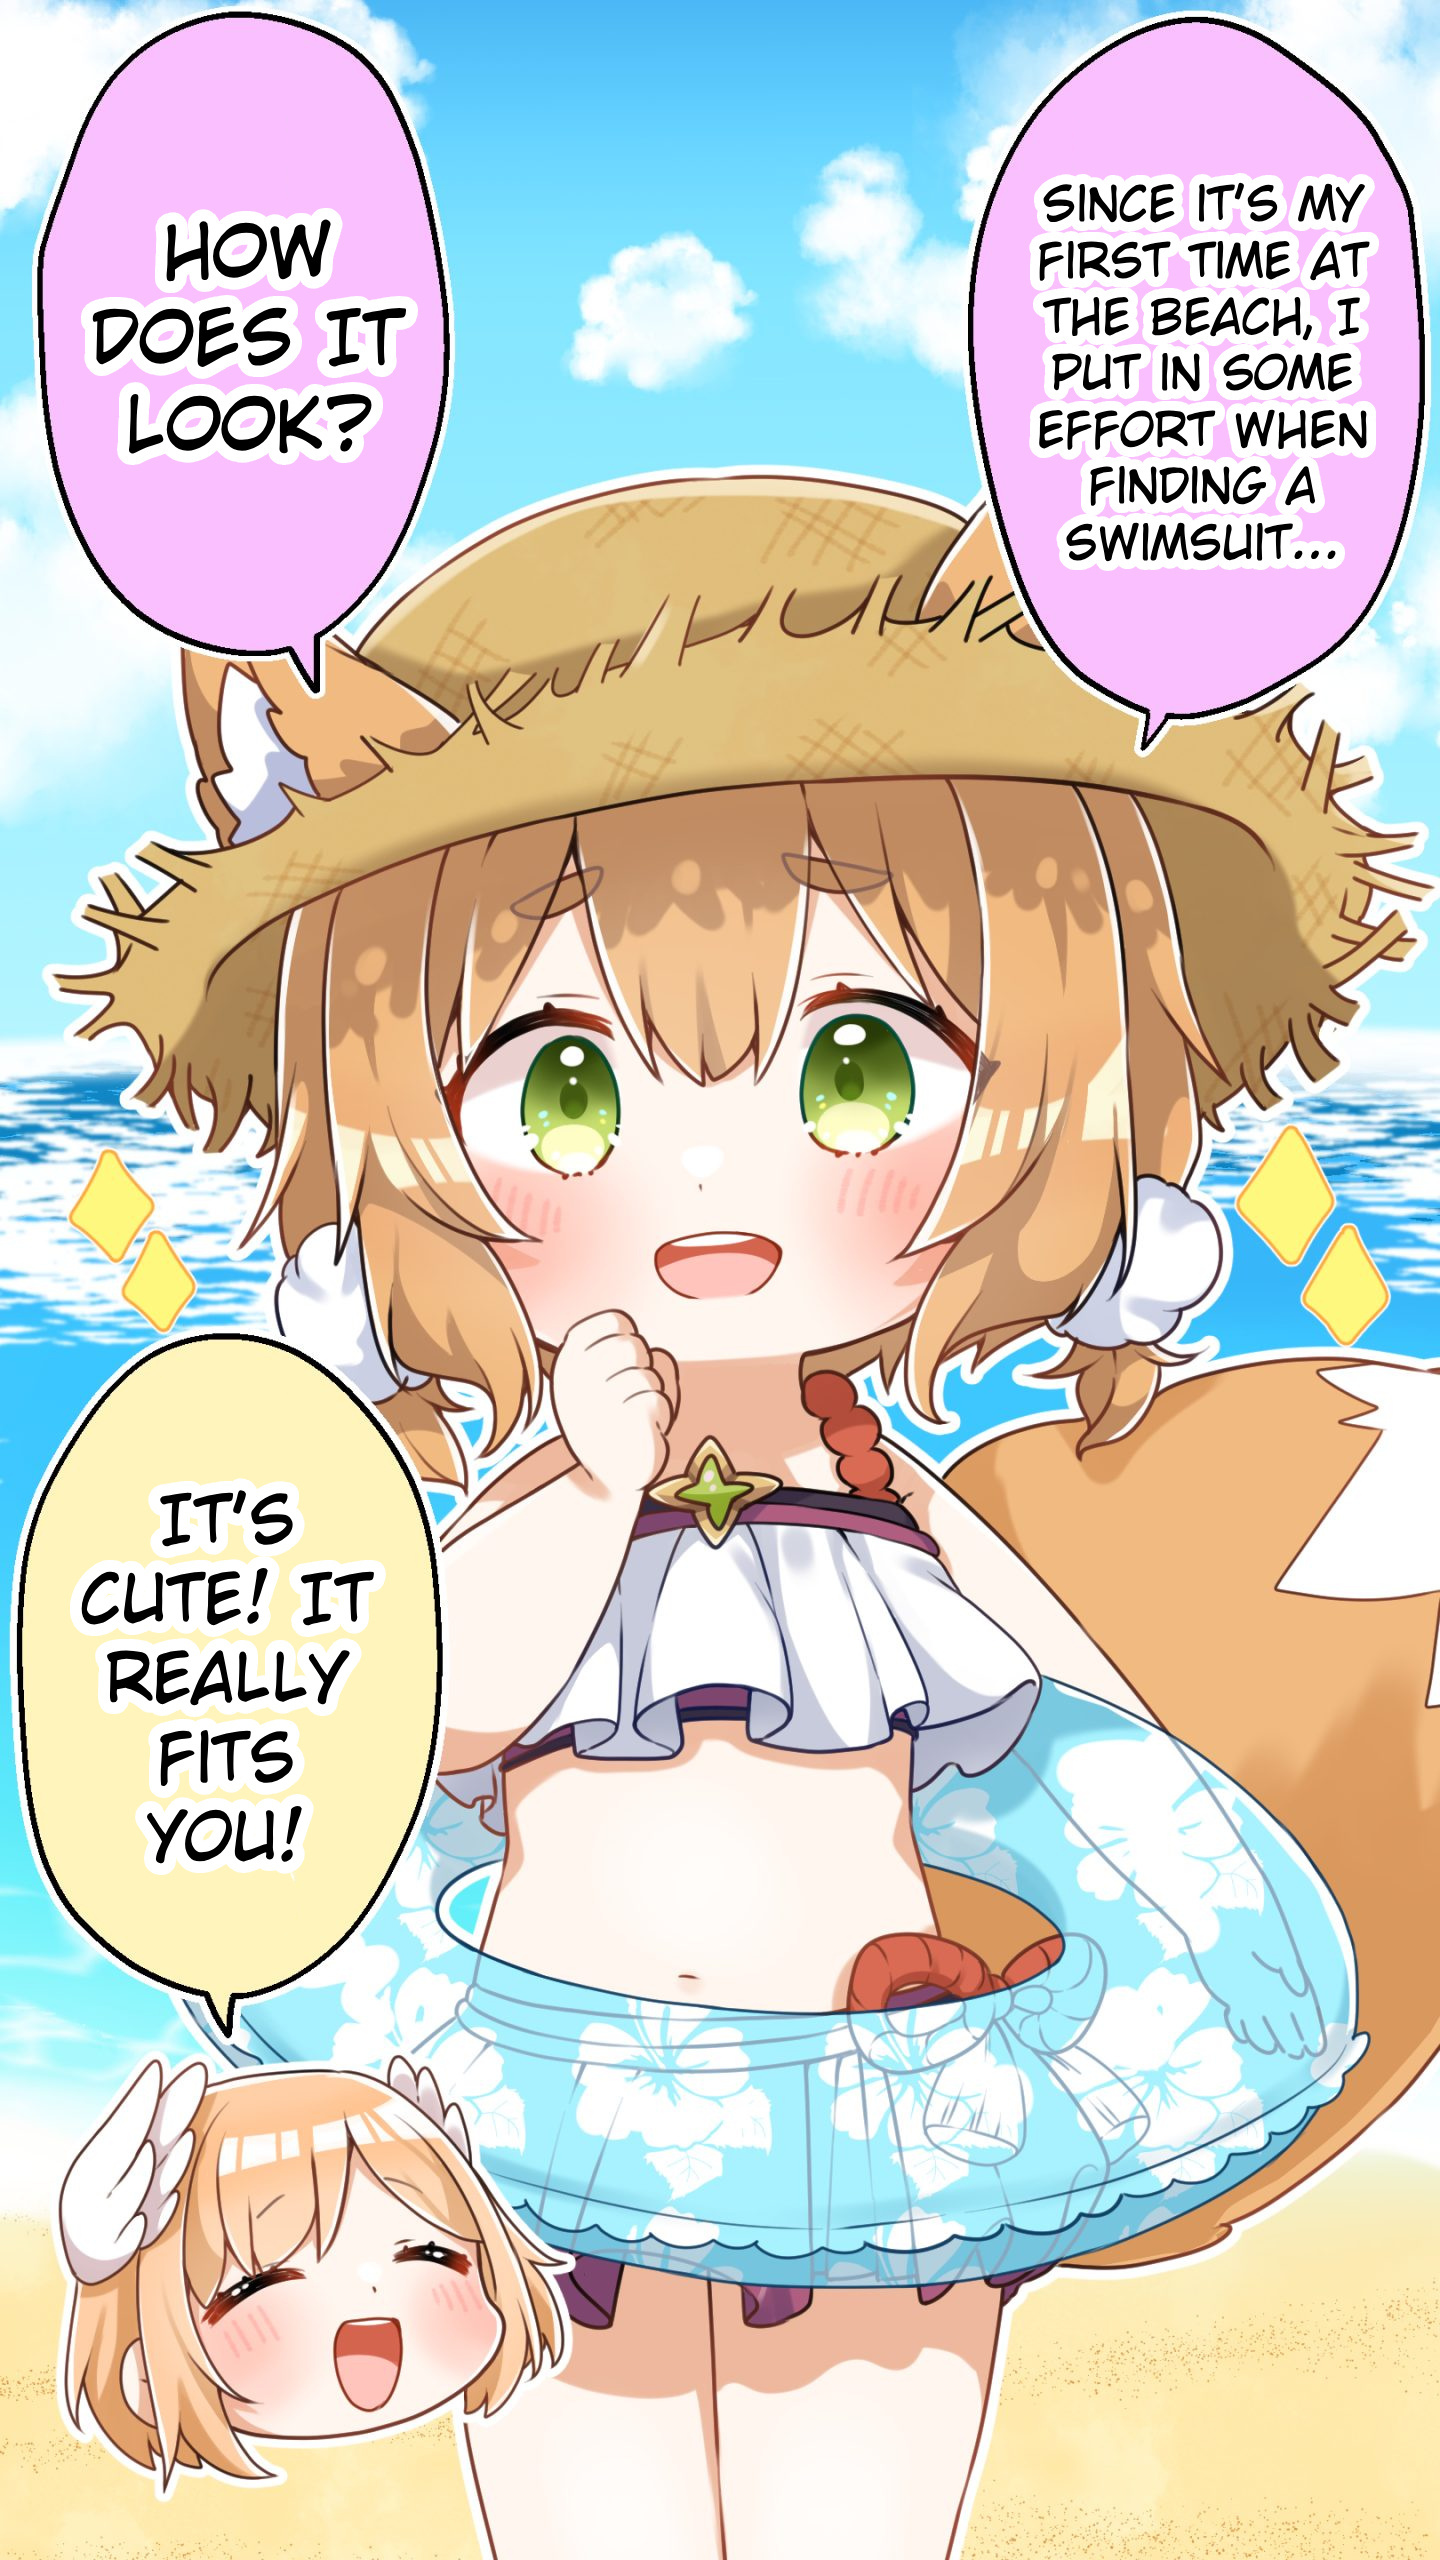 Laid Back Arcanadea Vol.1 Chapter 19: Episode 19: You Waited Long Didn't You! The Long Awaited Swimsuit Chapter Is Here! - Picture 1